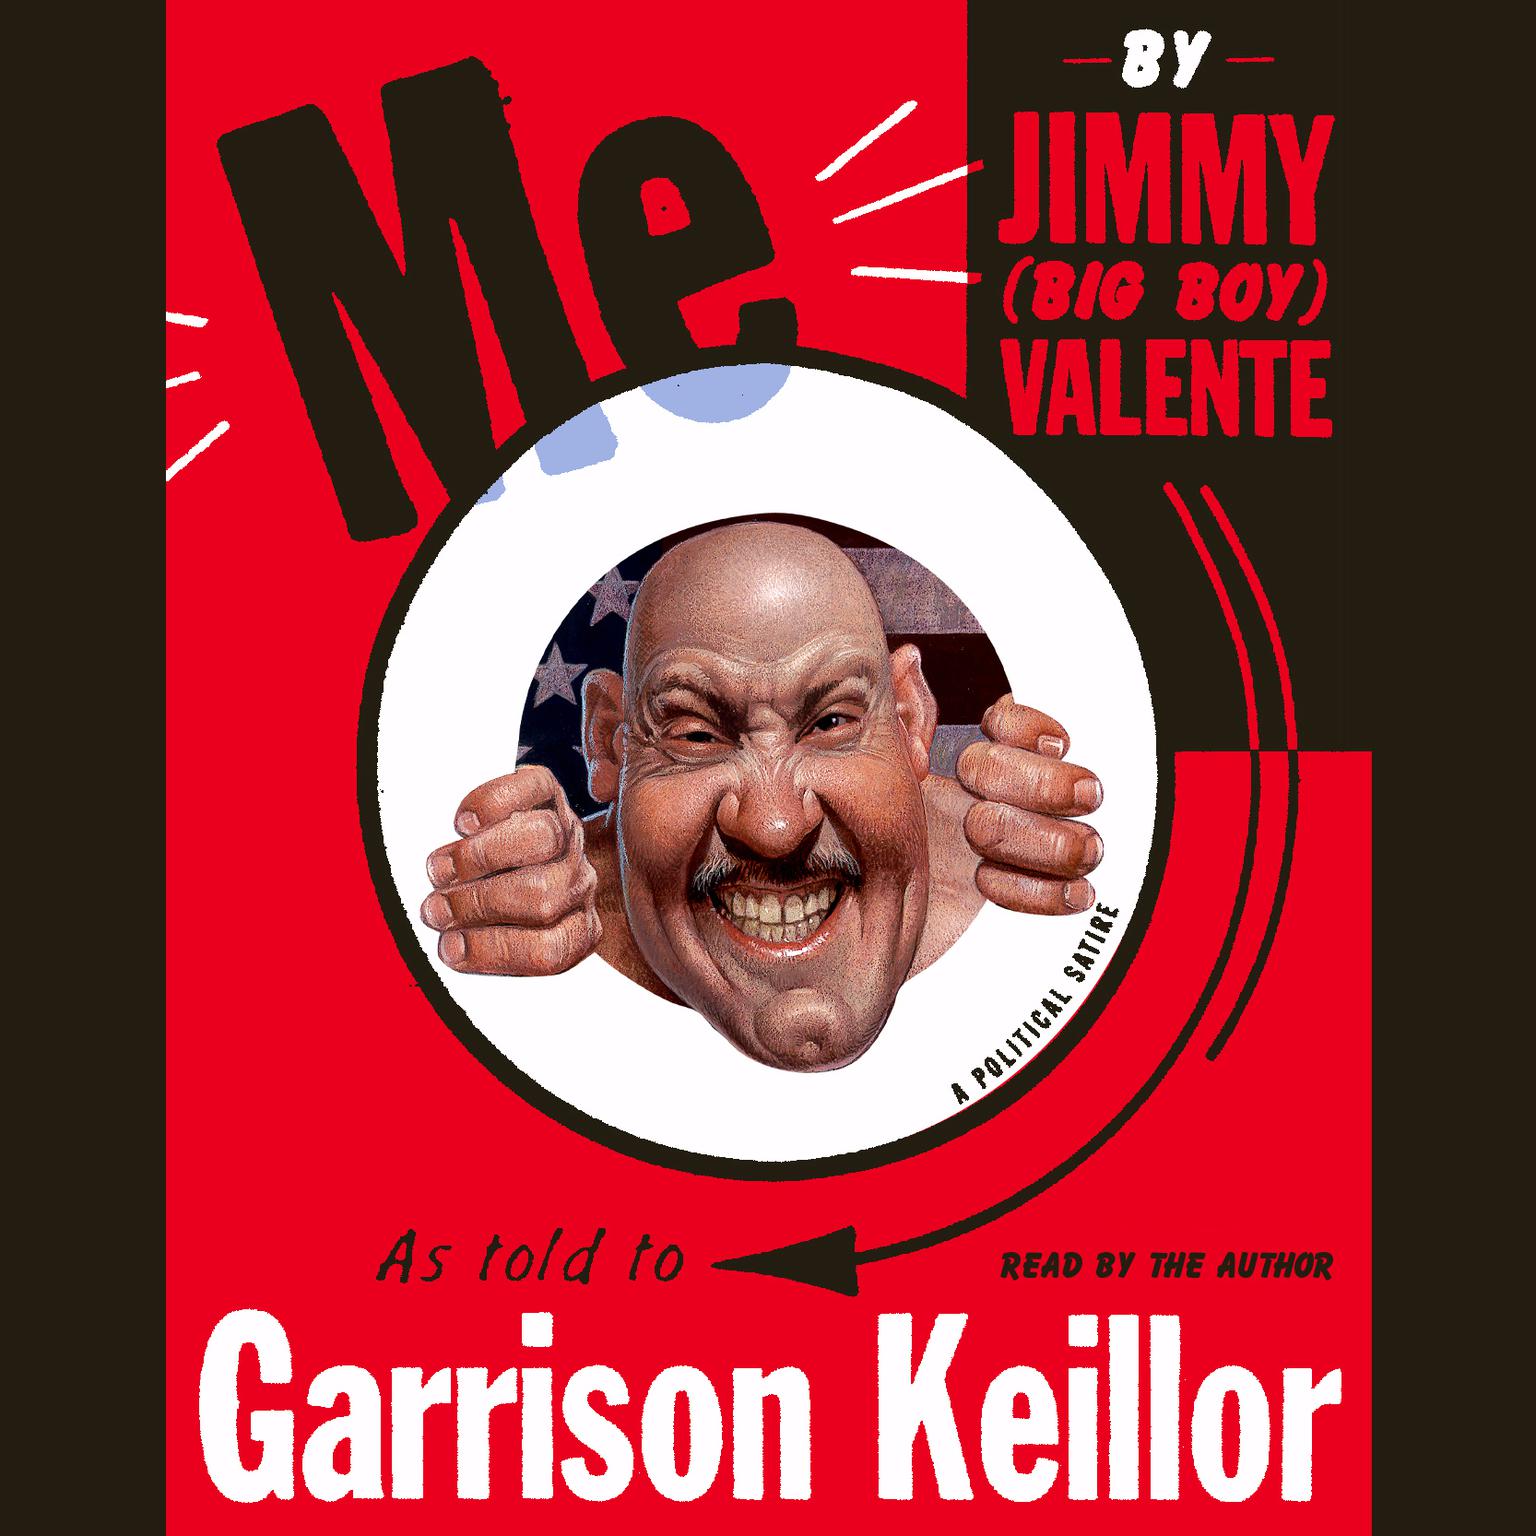 Me (Abridged): By Jimmy (Big Boy) Valente As Told to Garrison Keillor Audiobook, by Garrison Keillor